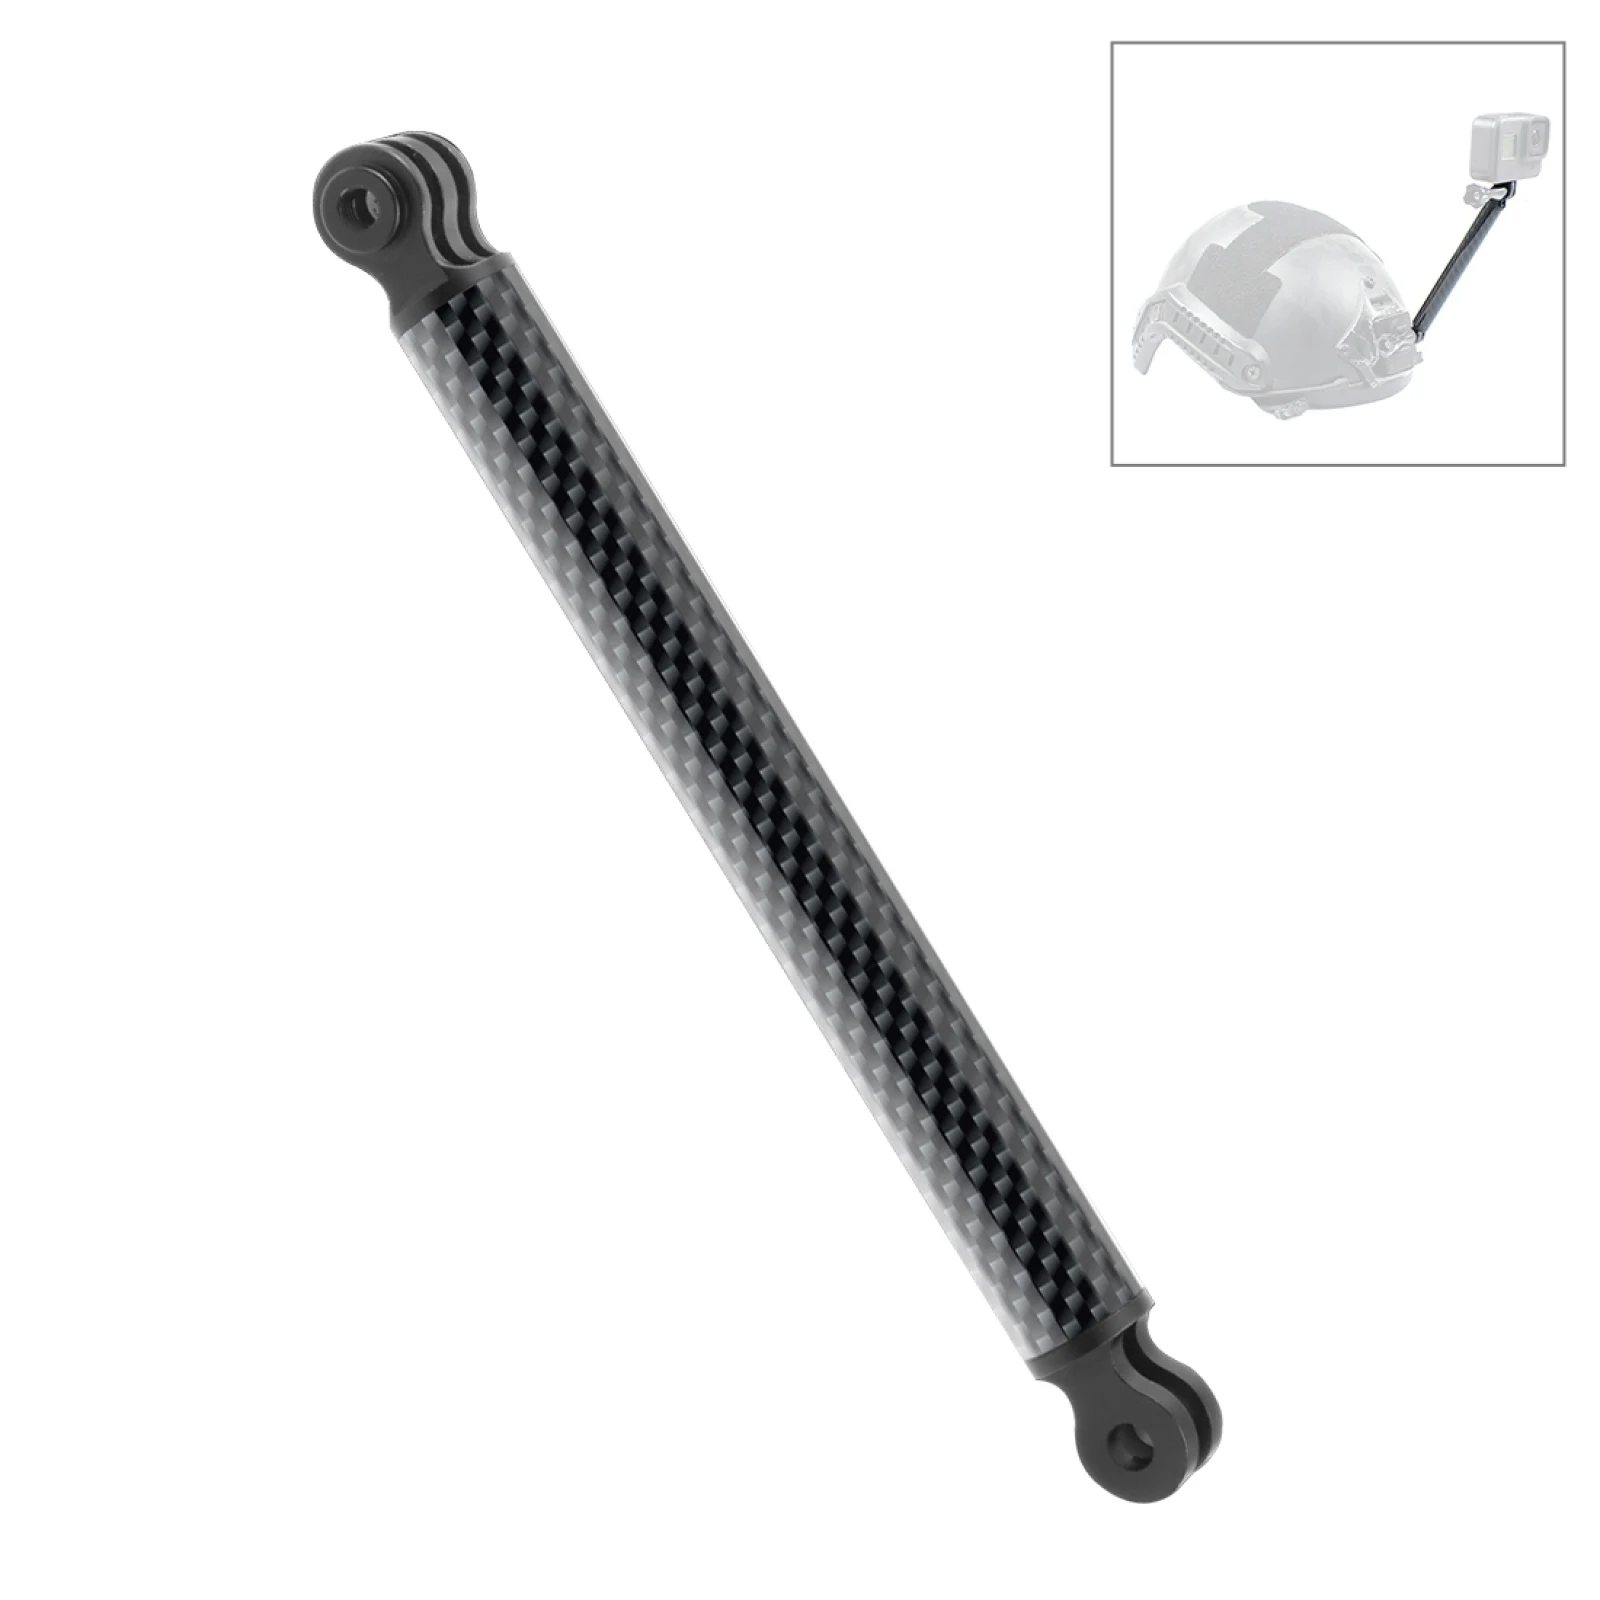 

PULUZ 165mm Aluminum Alloy Carbon Fiber Floating Buoyancy Selfie-stick Extension Arm Rods for GoPro / DJI Osmo Action and Others